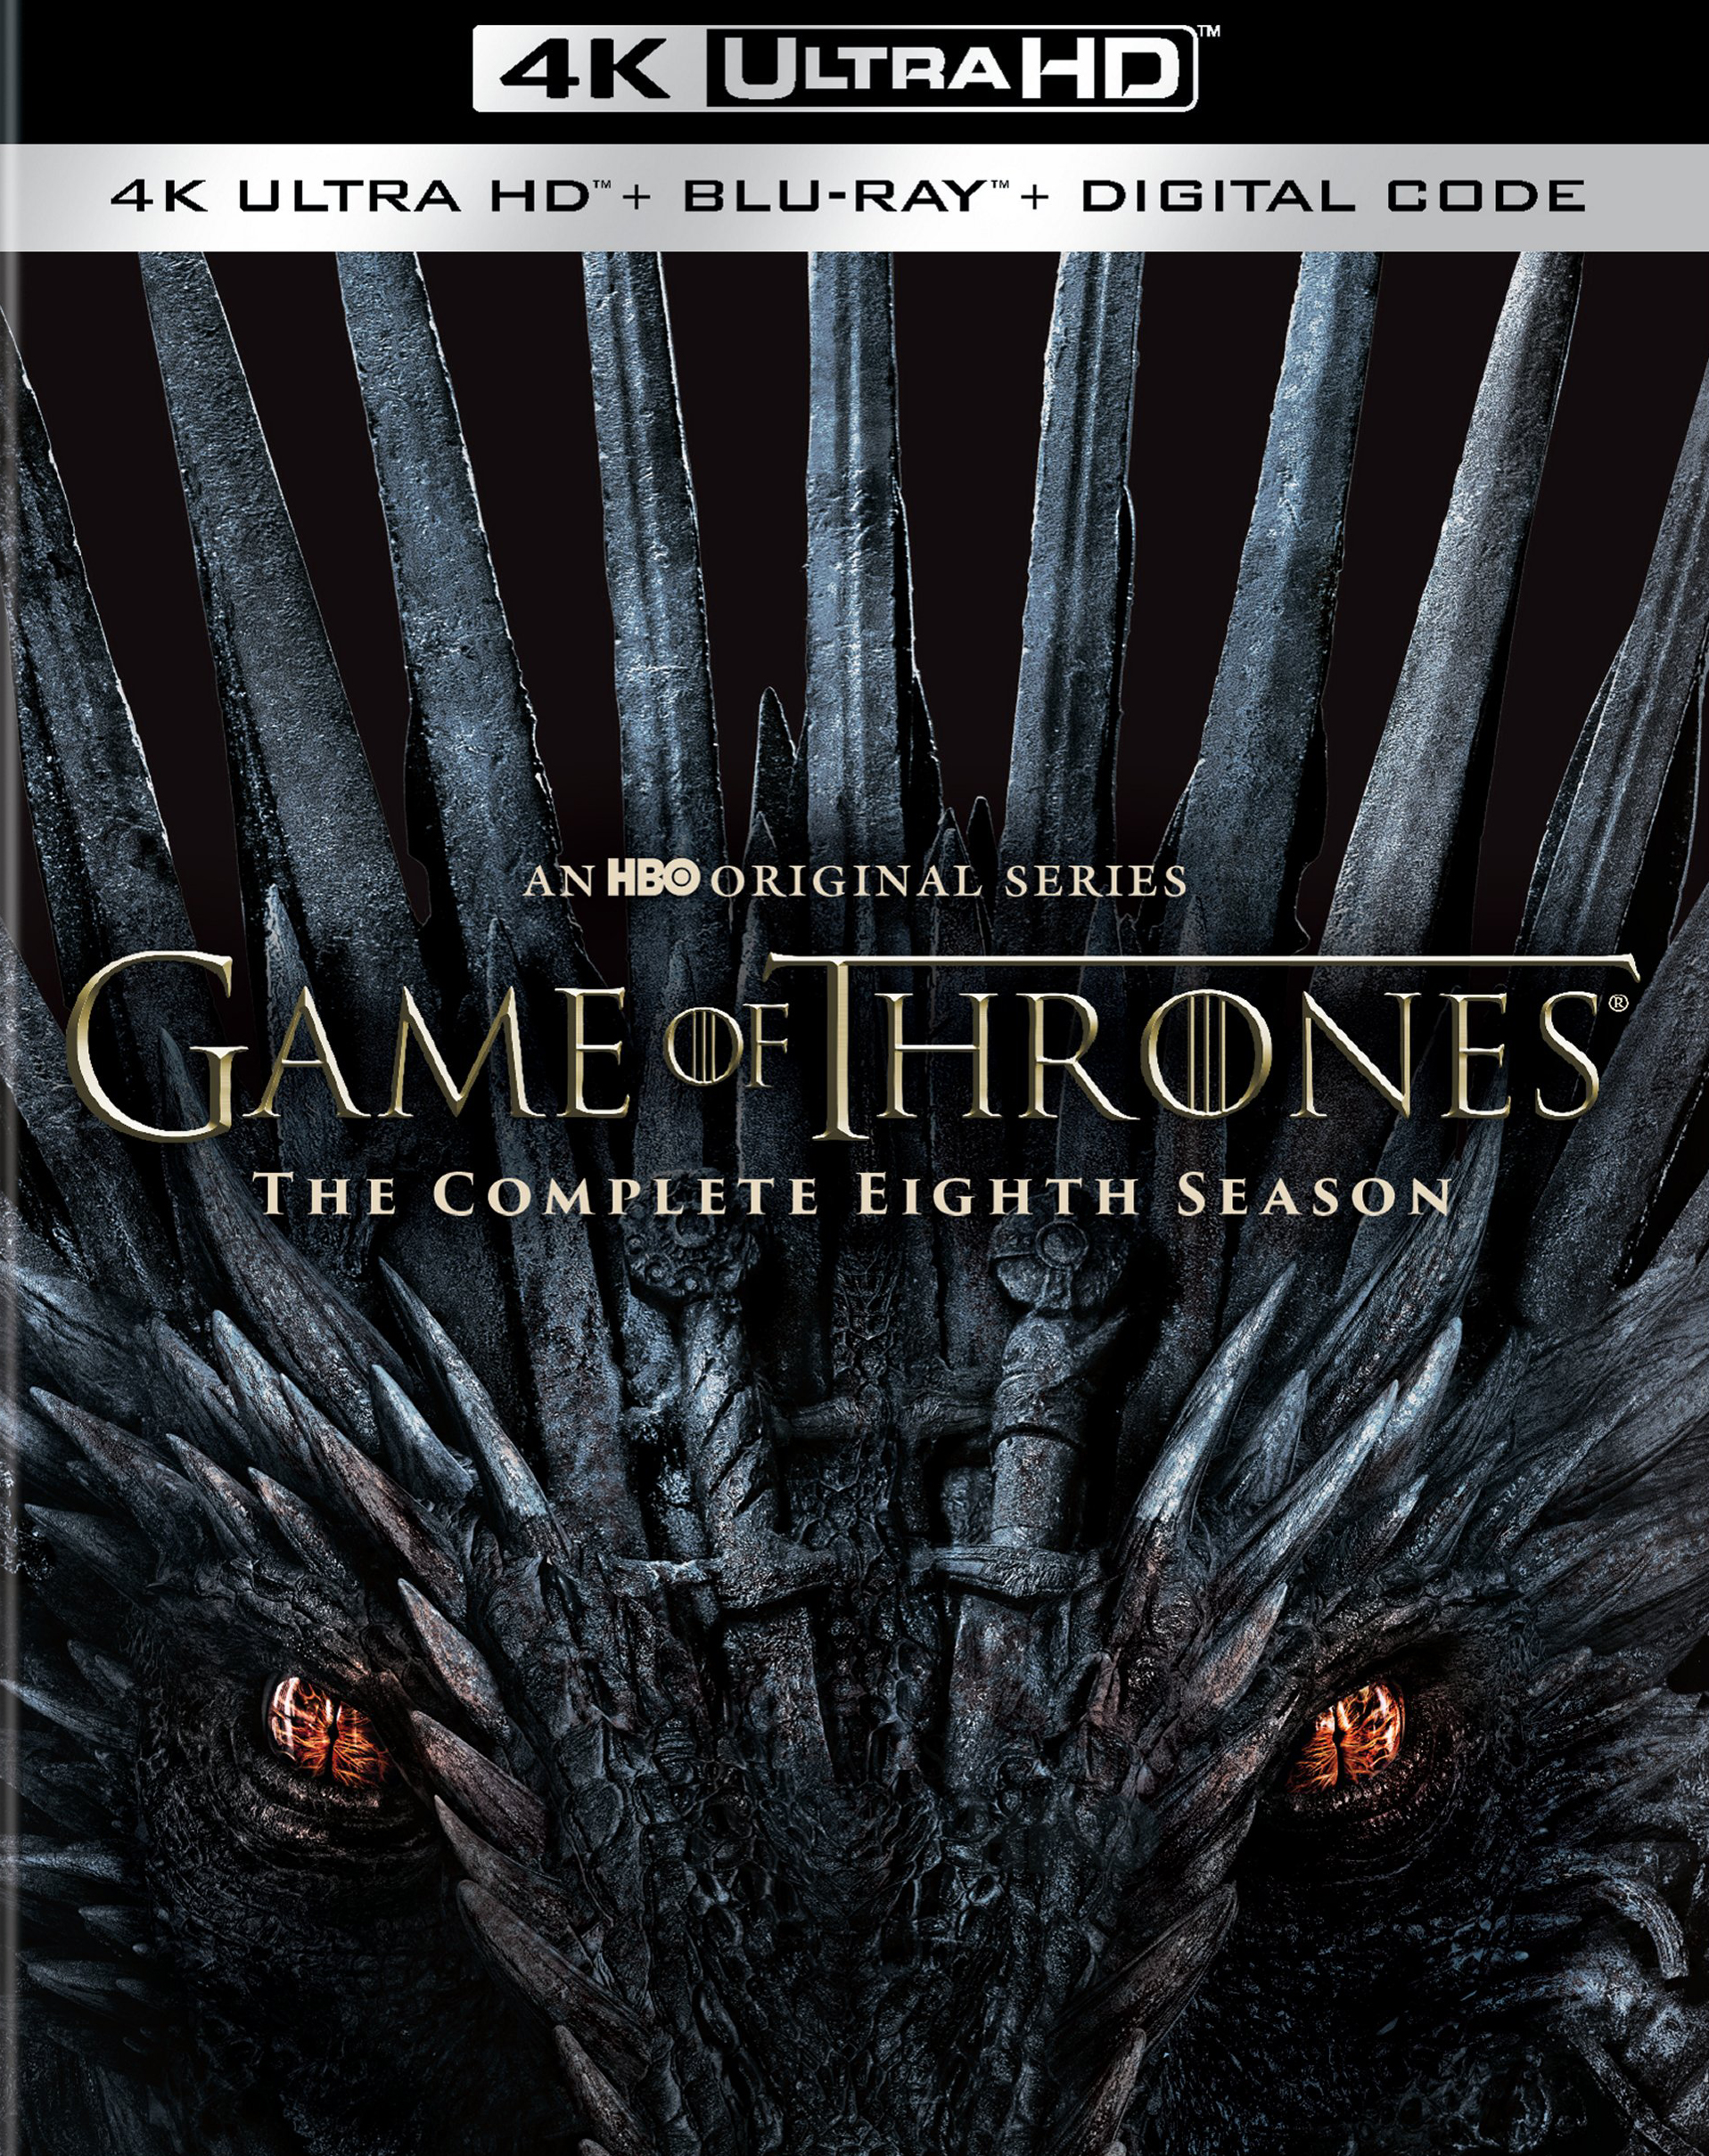 Game of Thrones: The Complete Collection 4K Blu-ray (4K Ultra HD + Blu-ray)